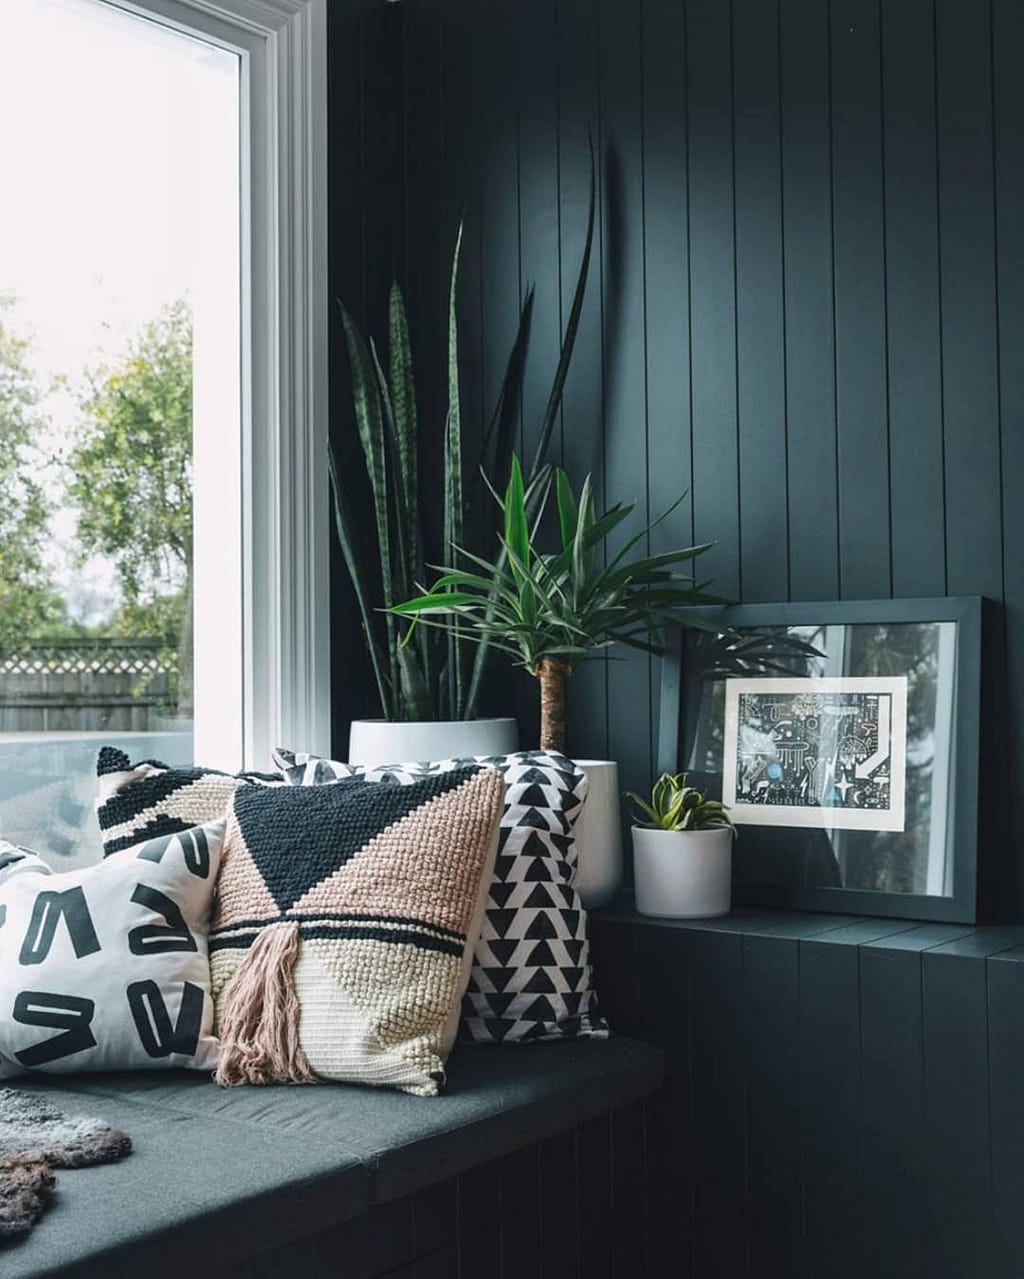 A corner of the room by the window with a black wall and bench, decorative pillows, and house plants.